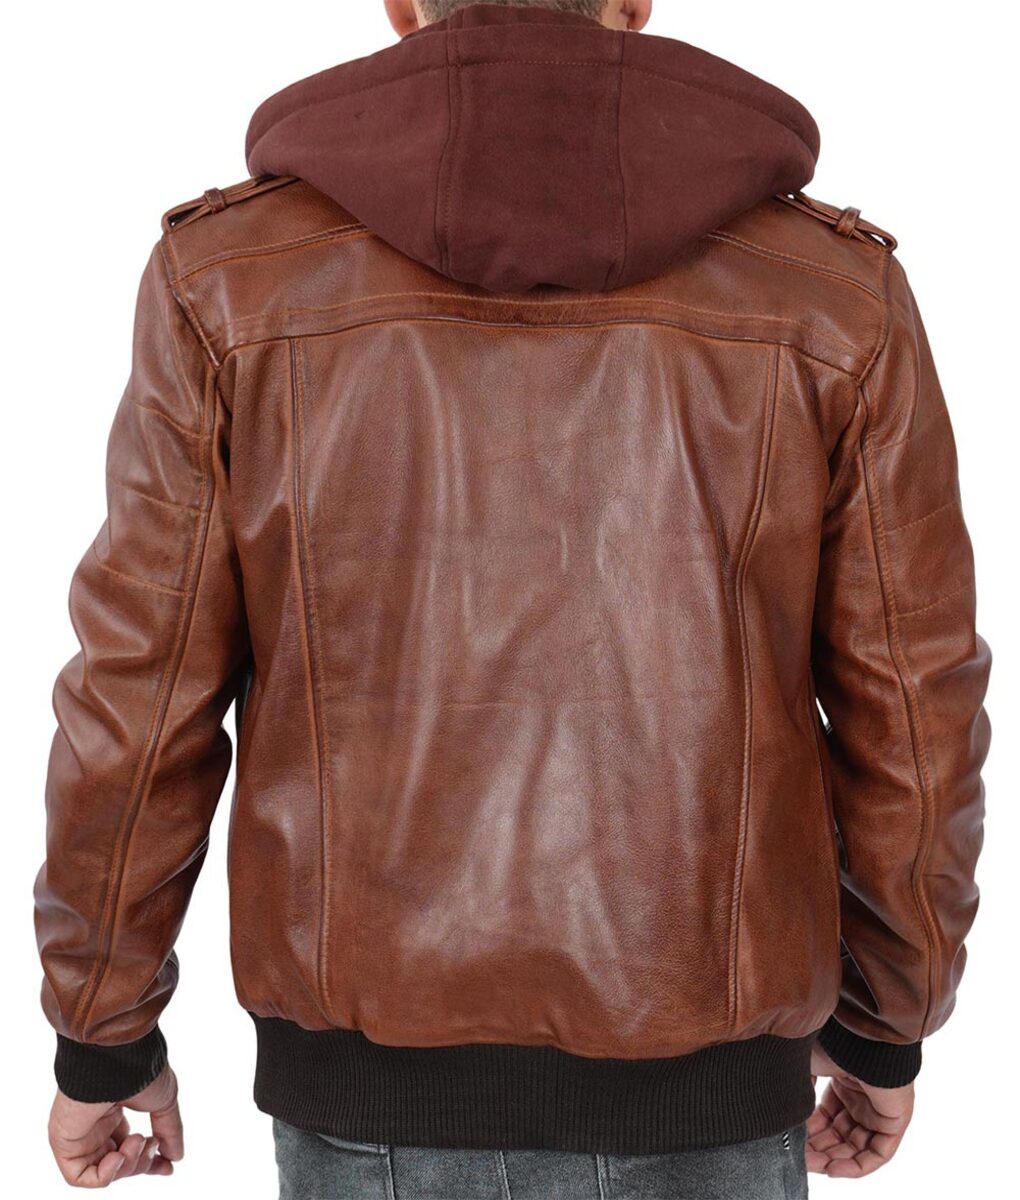 Mens_Brown_Real_Lambskin_Biker_Cafe_Racer_Leather_Jacket_with_hood